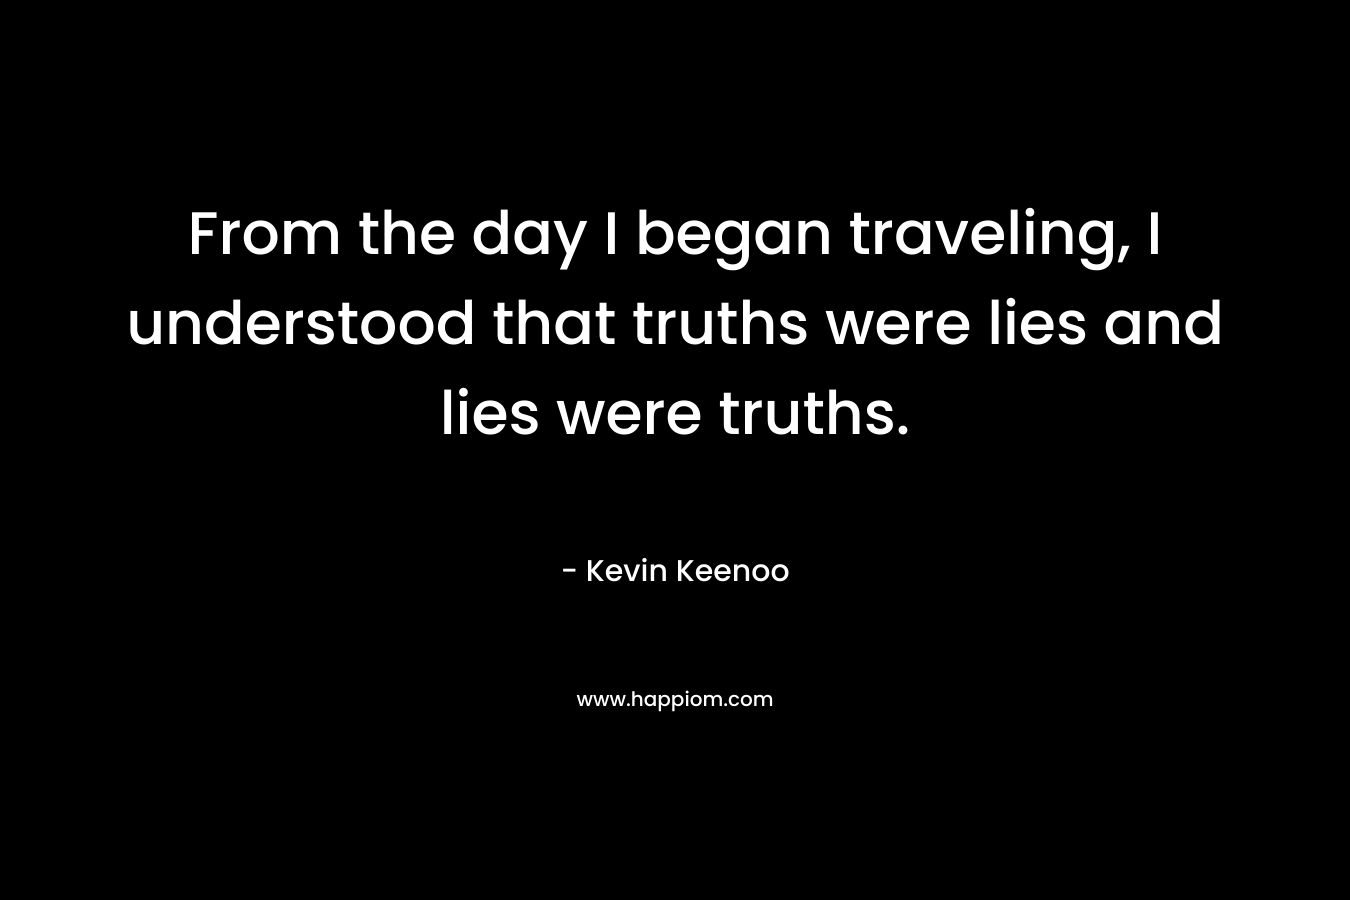 From the day I began traveling, I understood that truths were lies and lies were truths.